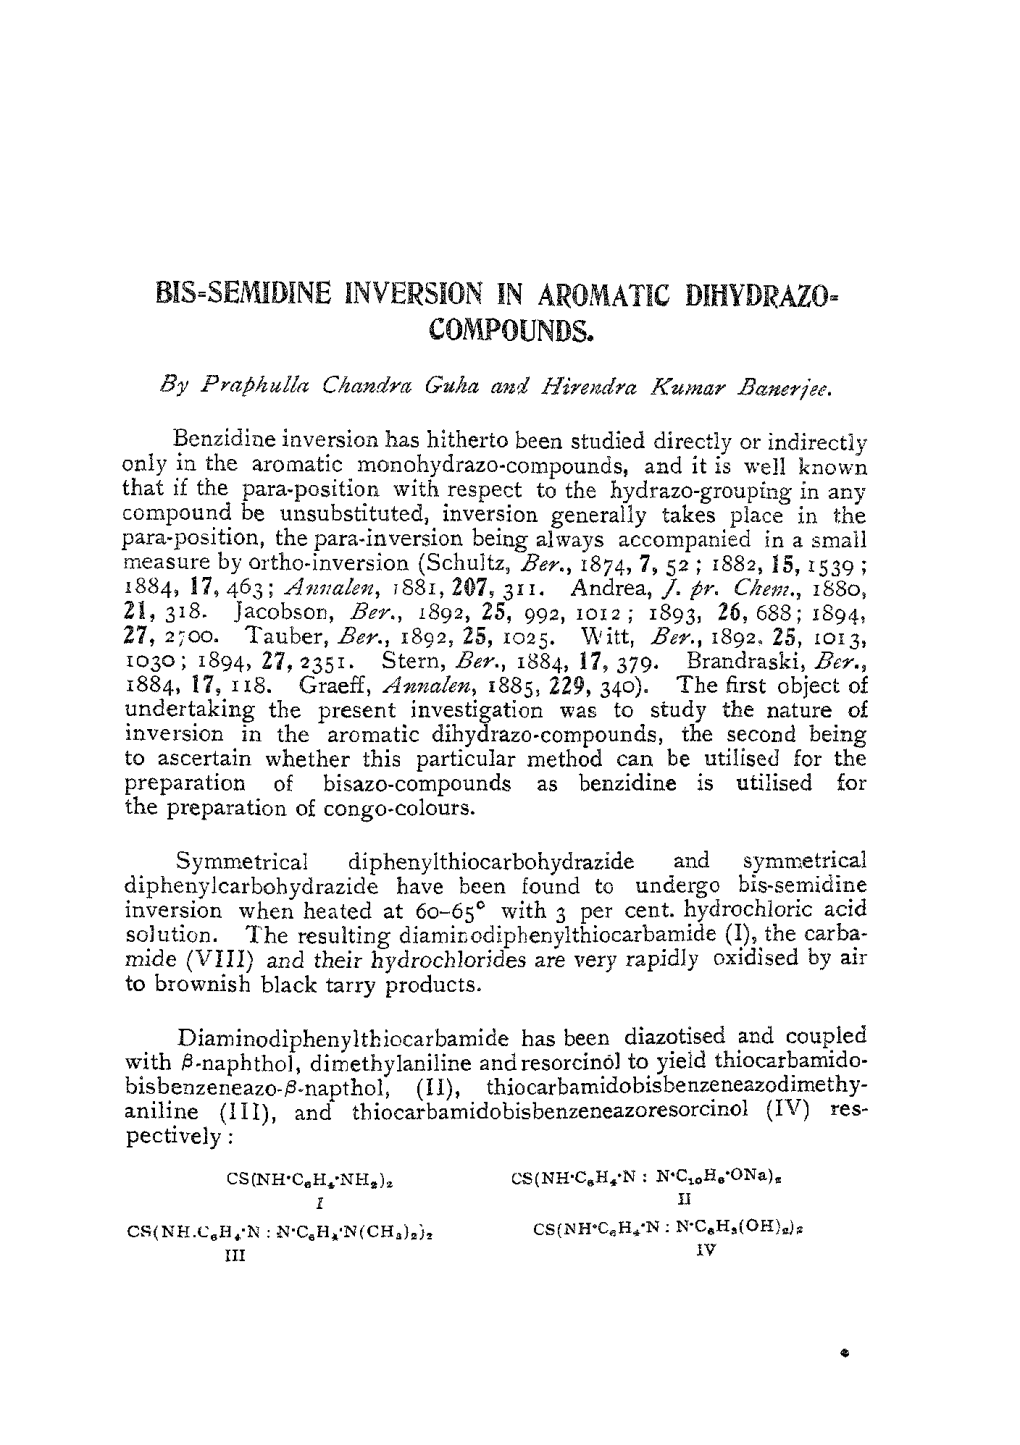 Benzidine Inversion Has Hitherto Been Studied Directly Or Indirectly